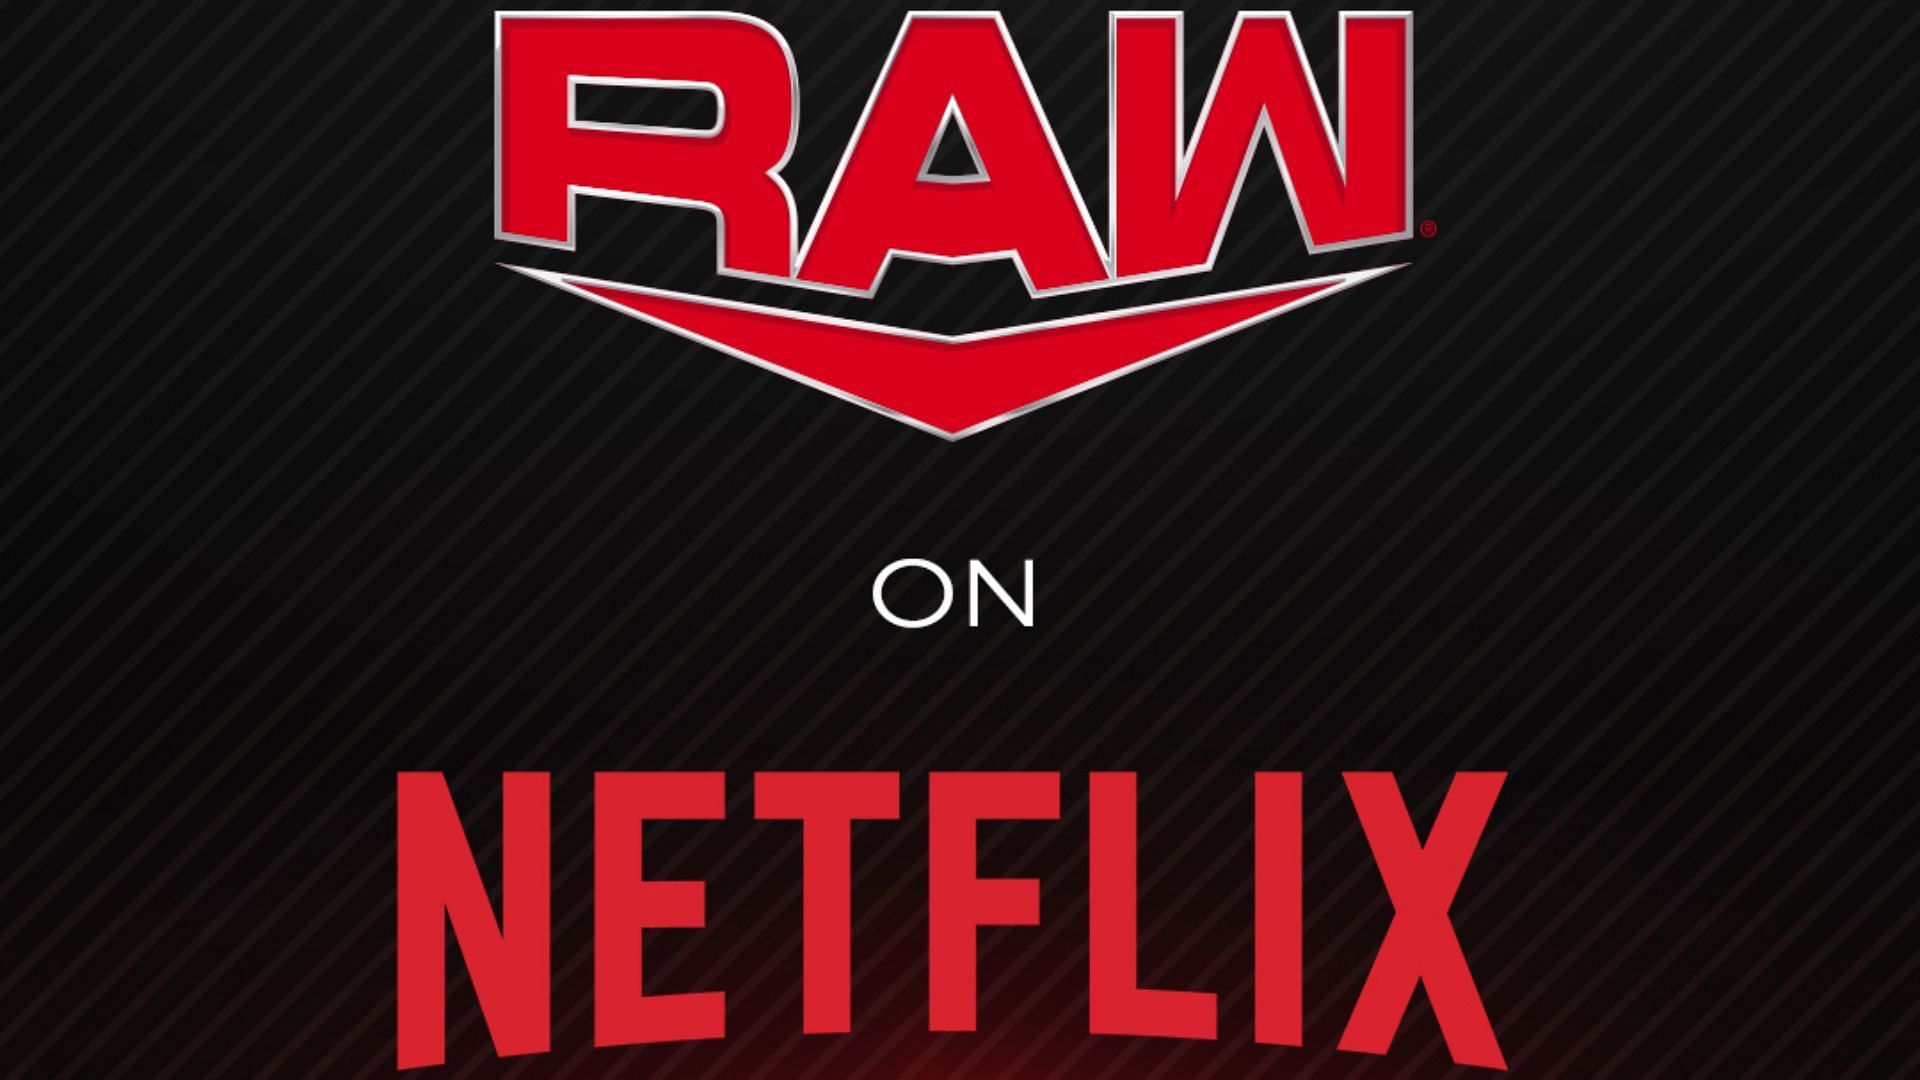 WWE RAW is set to stream on Netflix in 2025.